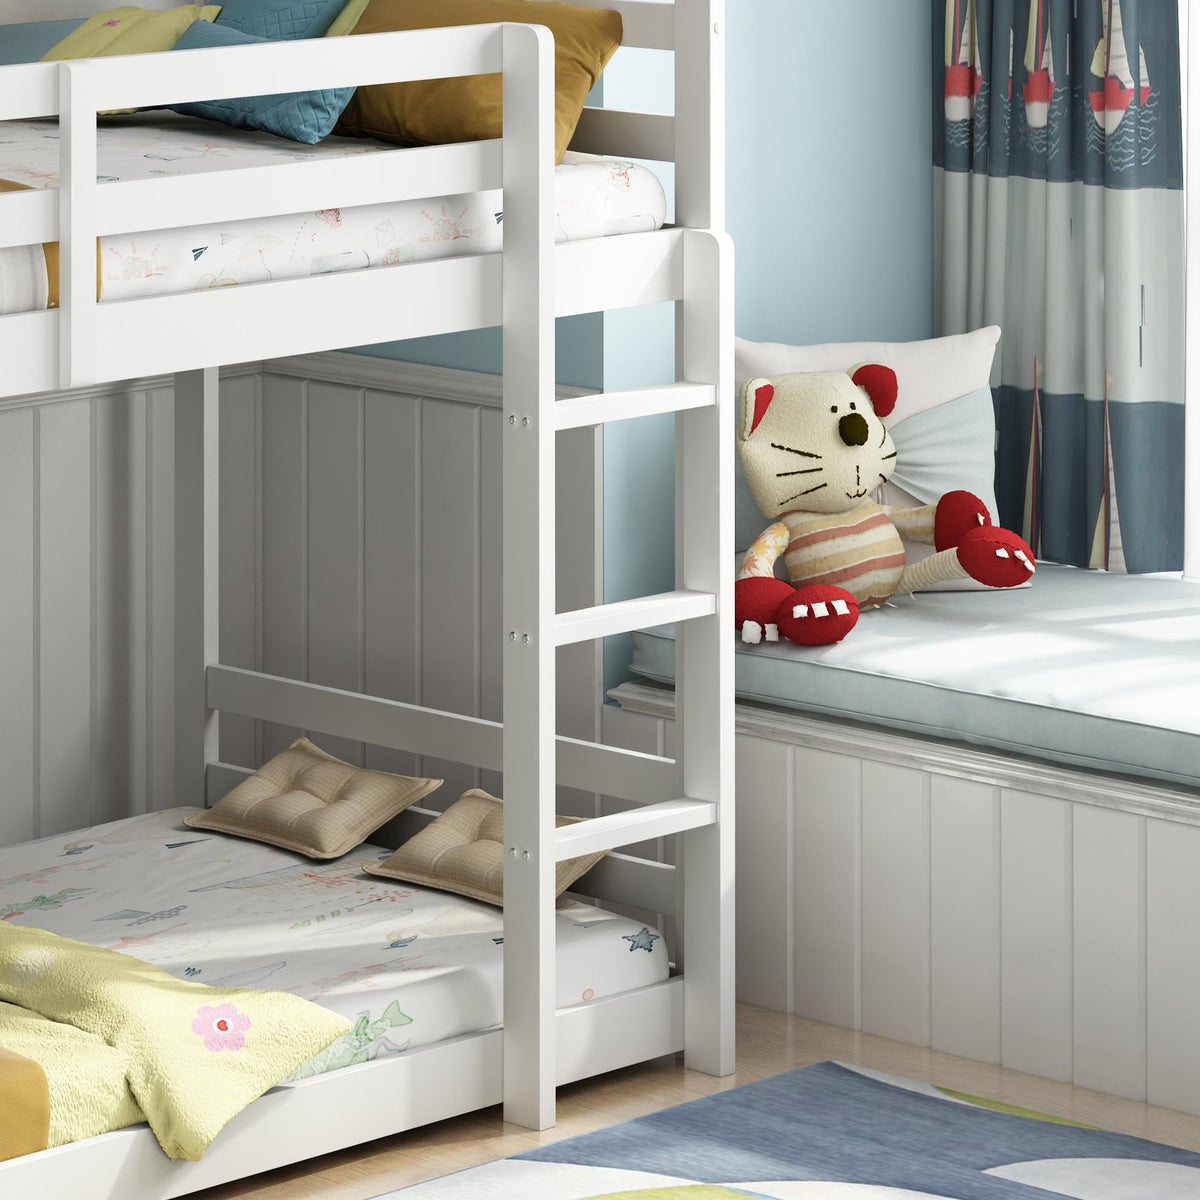 House Bunkbed kids white 3ft single twin bunk bed wooden childrens bedroom furniture